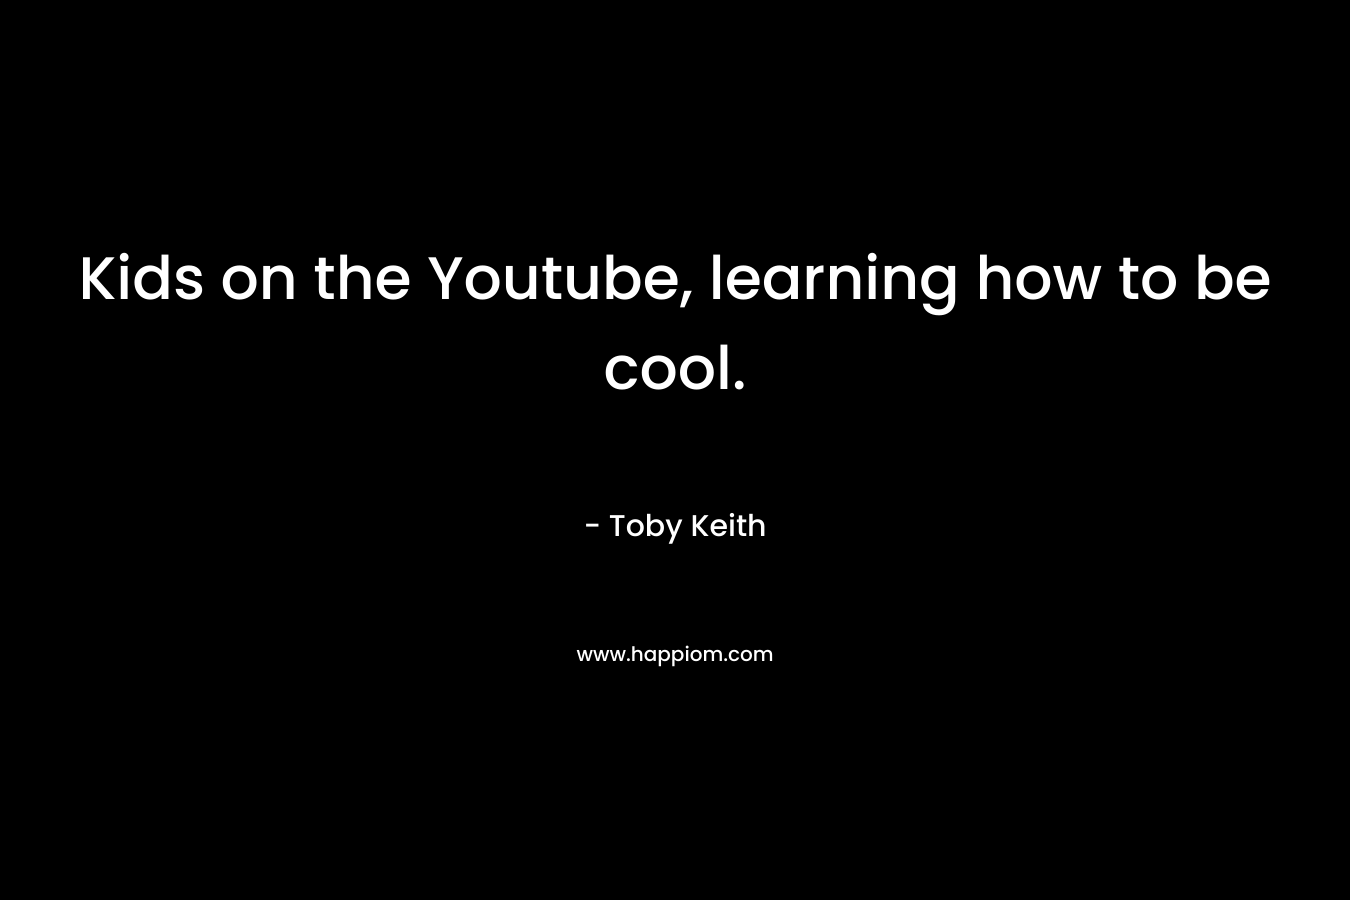 Kids on the Youtube, learning how to be cool.